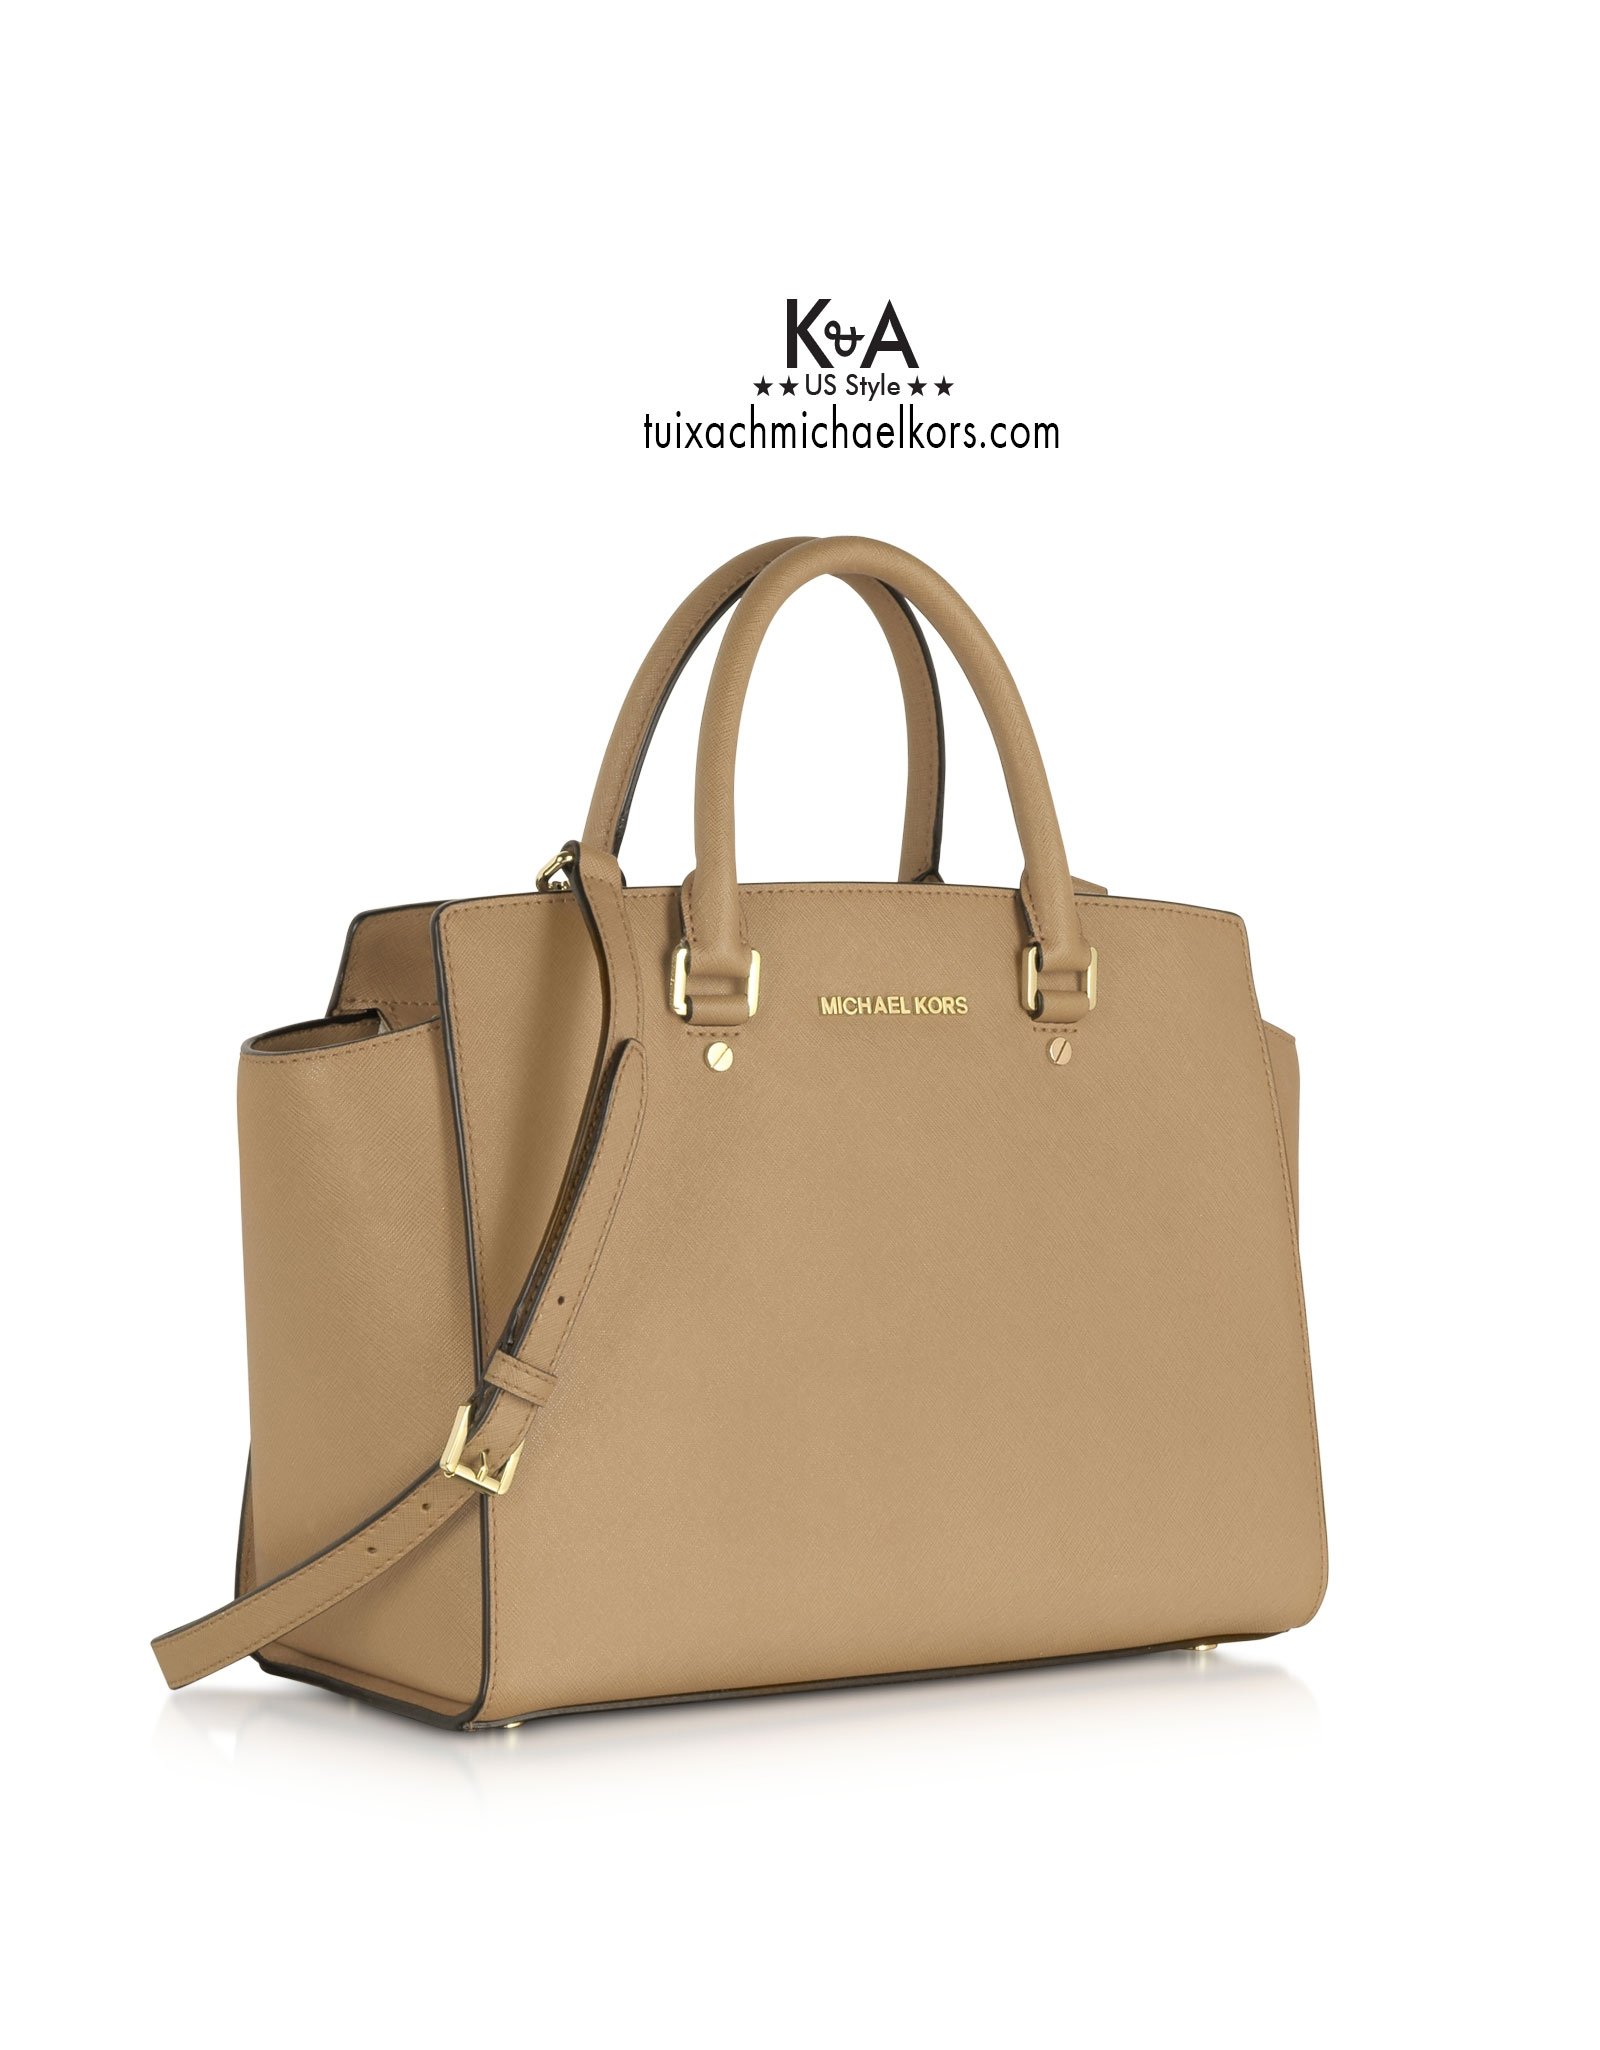 Michael Kors Selma Bags Comparison and Review  Elle Blogs  Michael kors  outlet online Michael kors selma Michael kors outlet